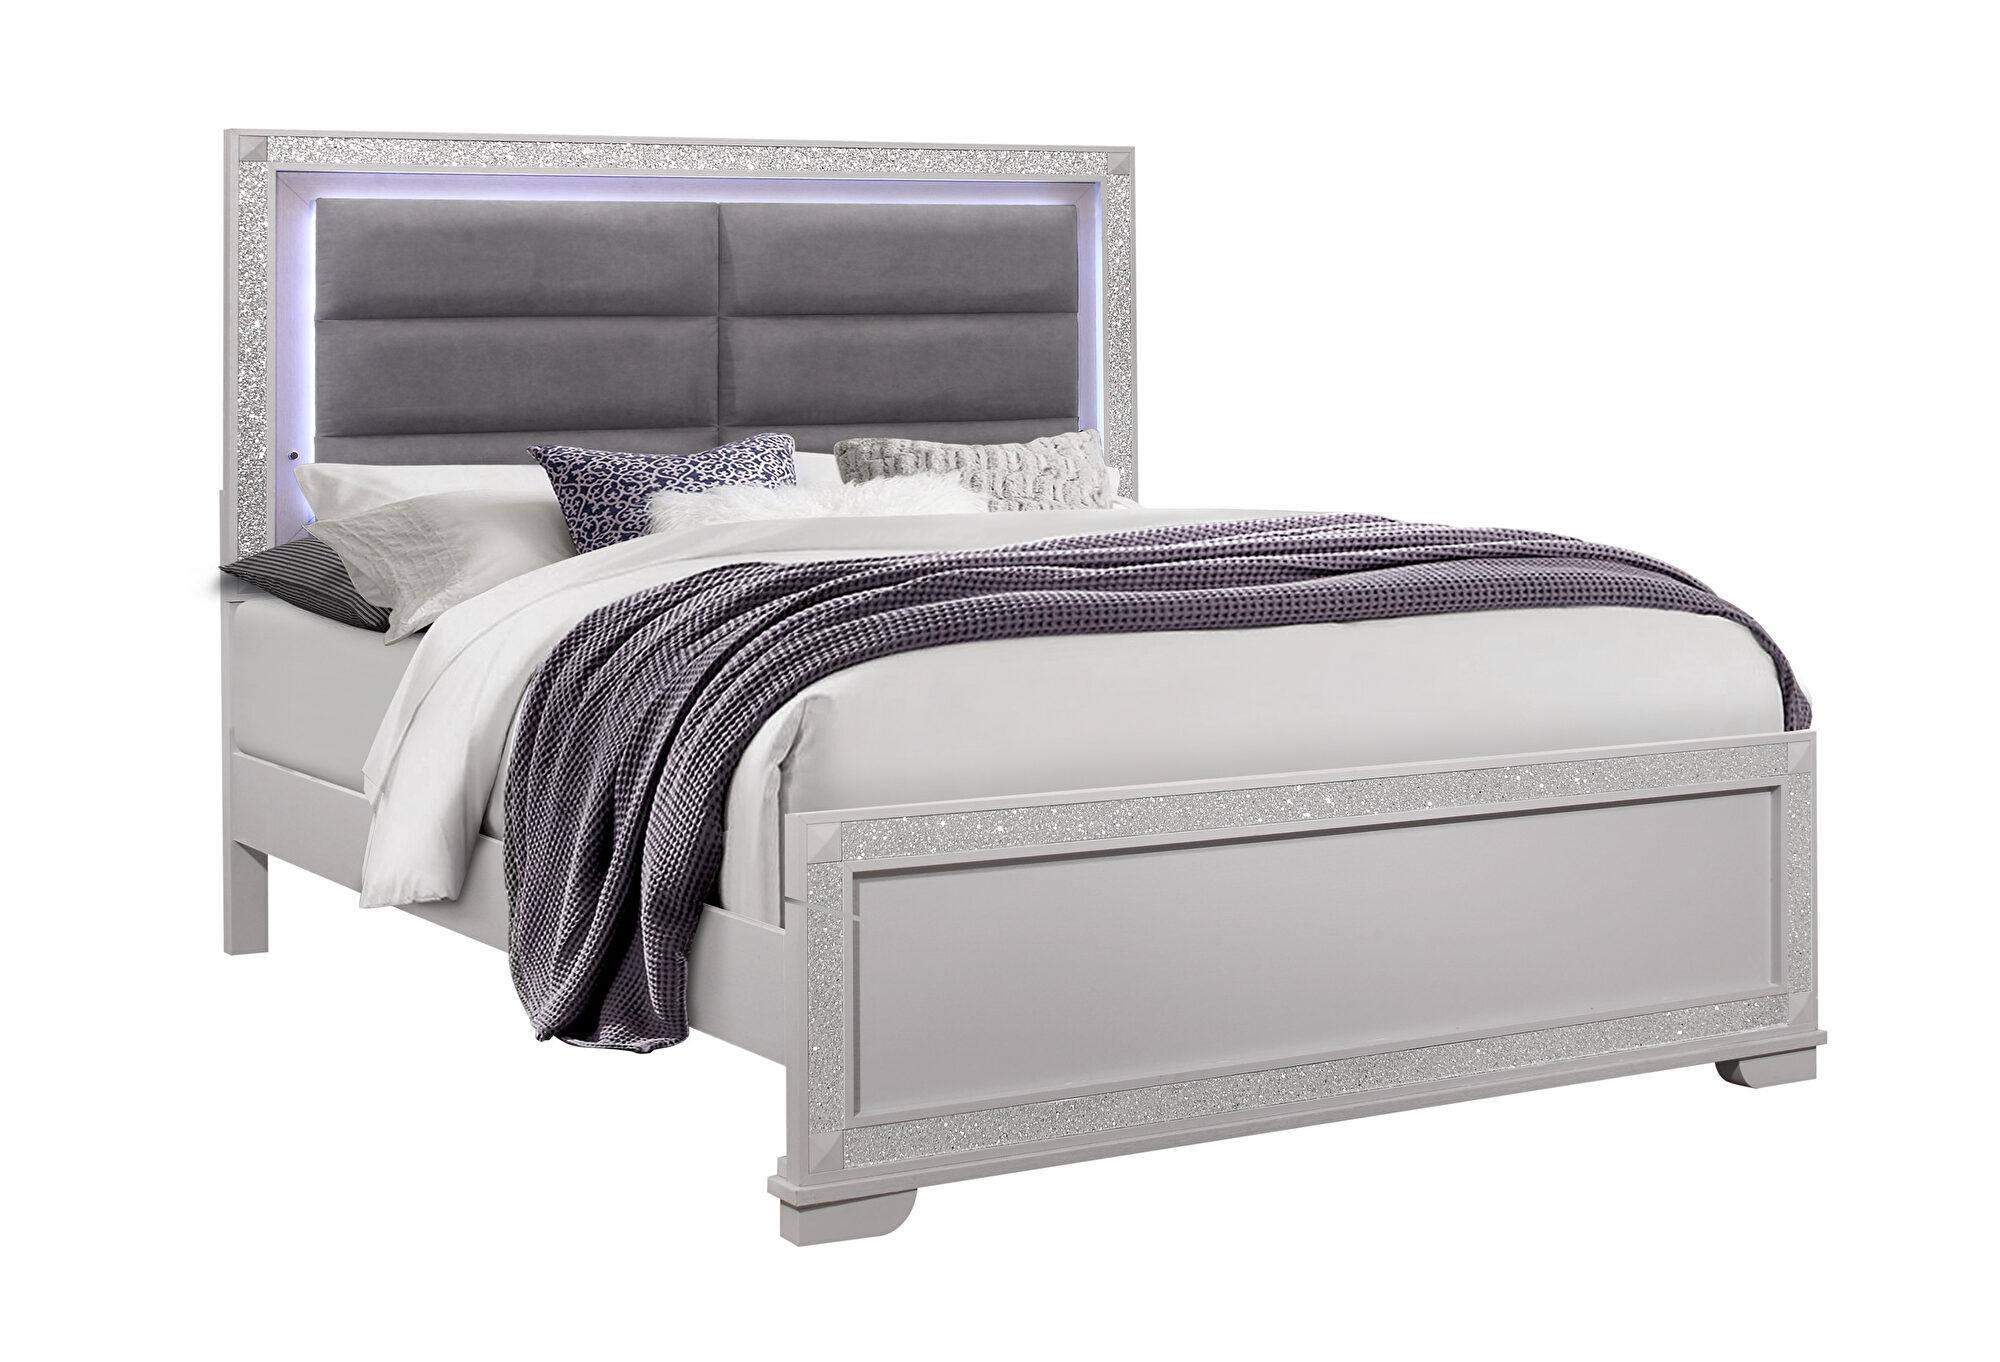 Modern Platform Bed CHALICE CHALICE-SILVER-FB in Silver Faux Leather